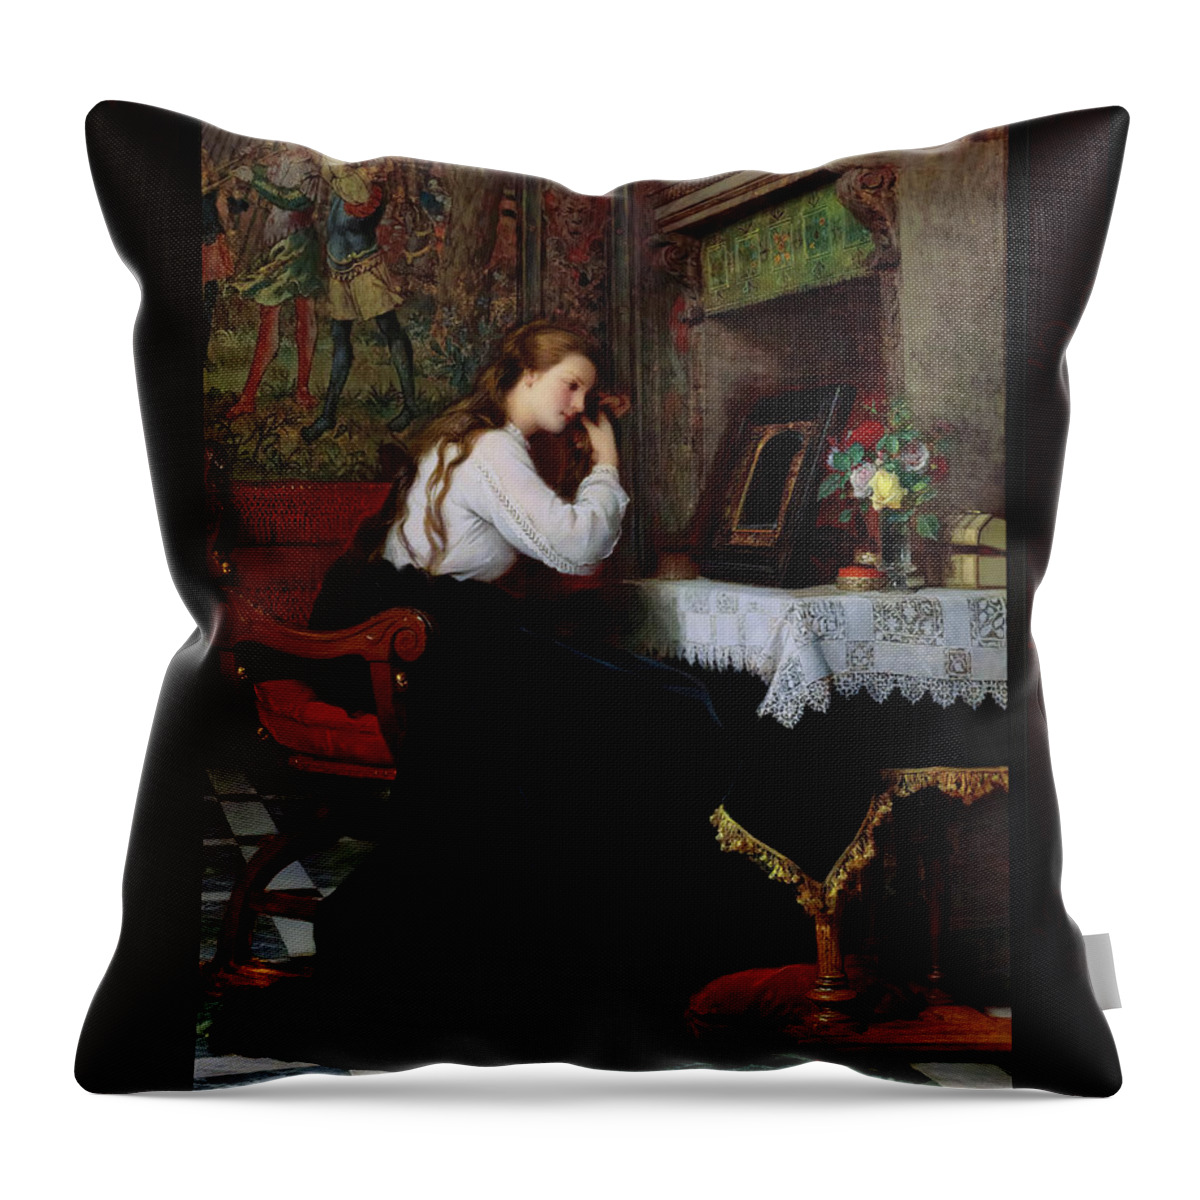 The Mirror Throw Pillow featuring the painting The Mirror by Pierre-Charles Comte Remastered Xzendor7 Fine Art Classical Reproductions by Rolando Burbon